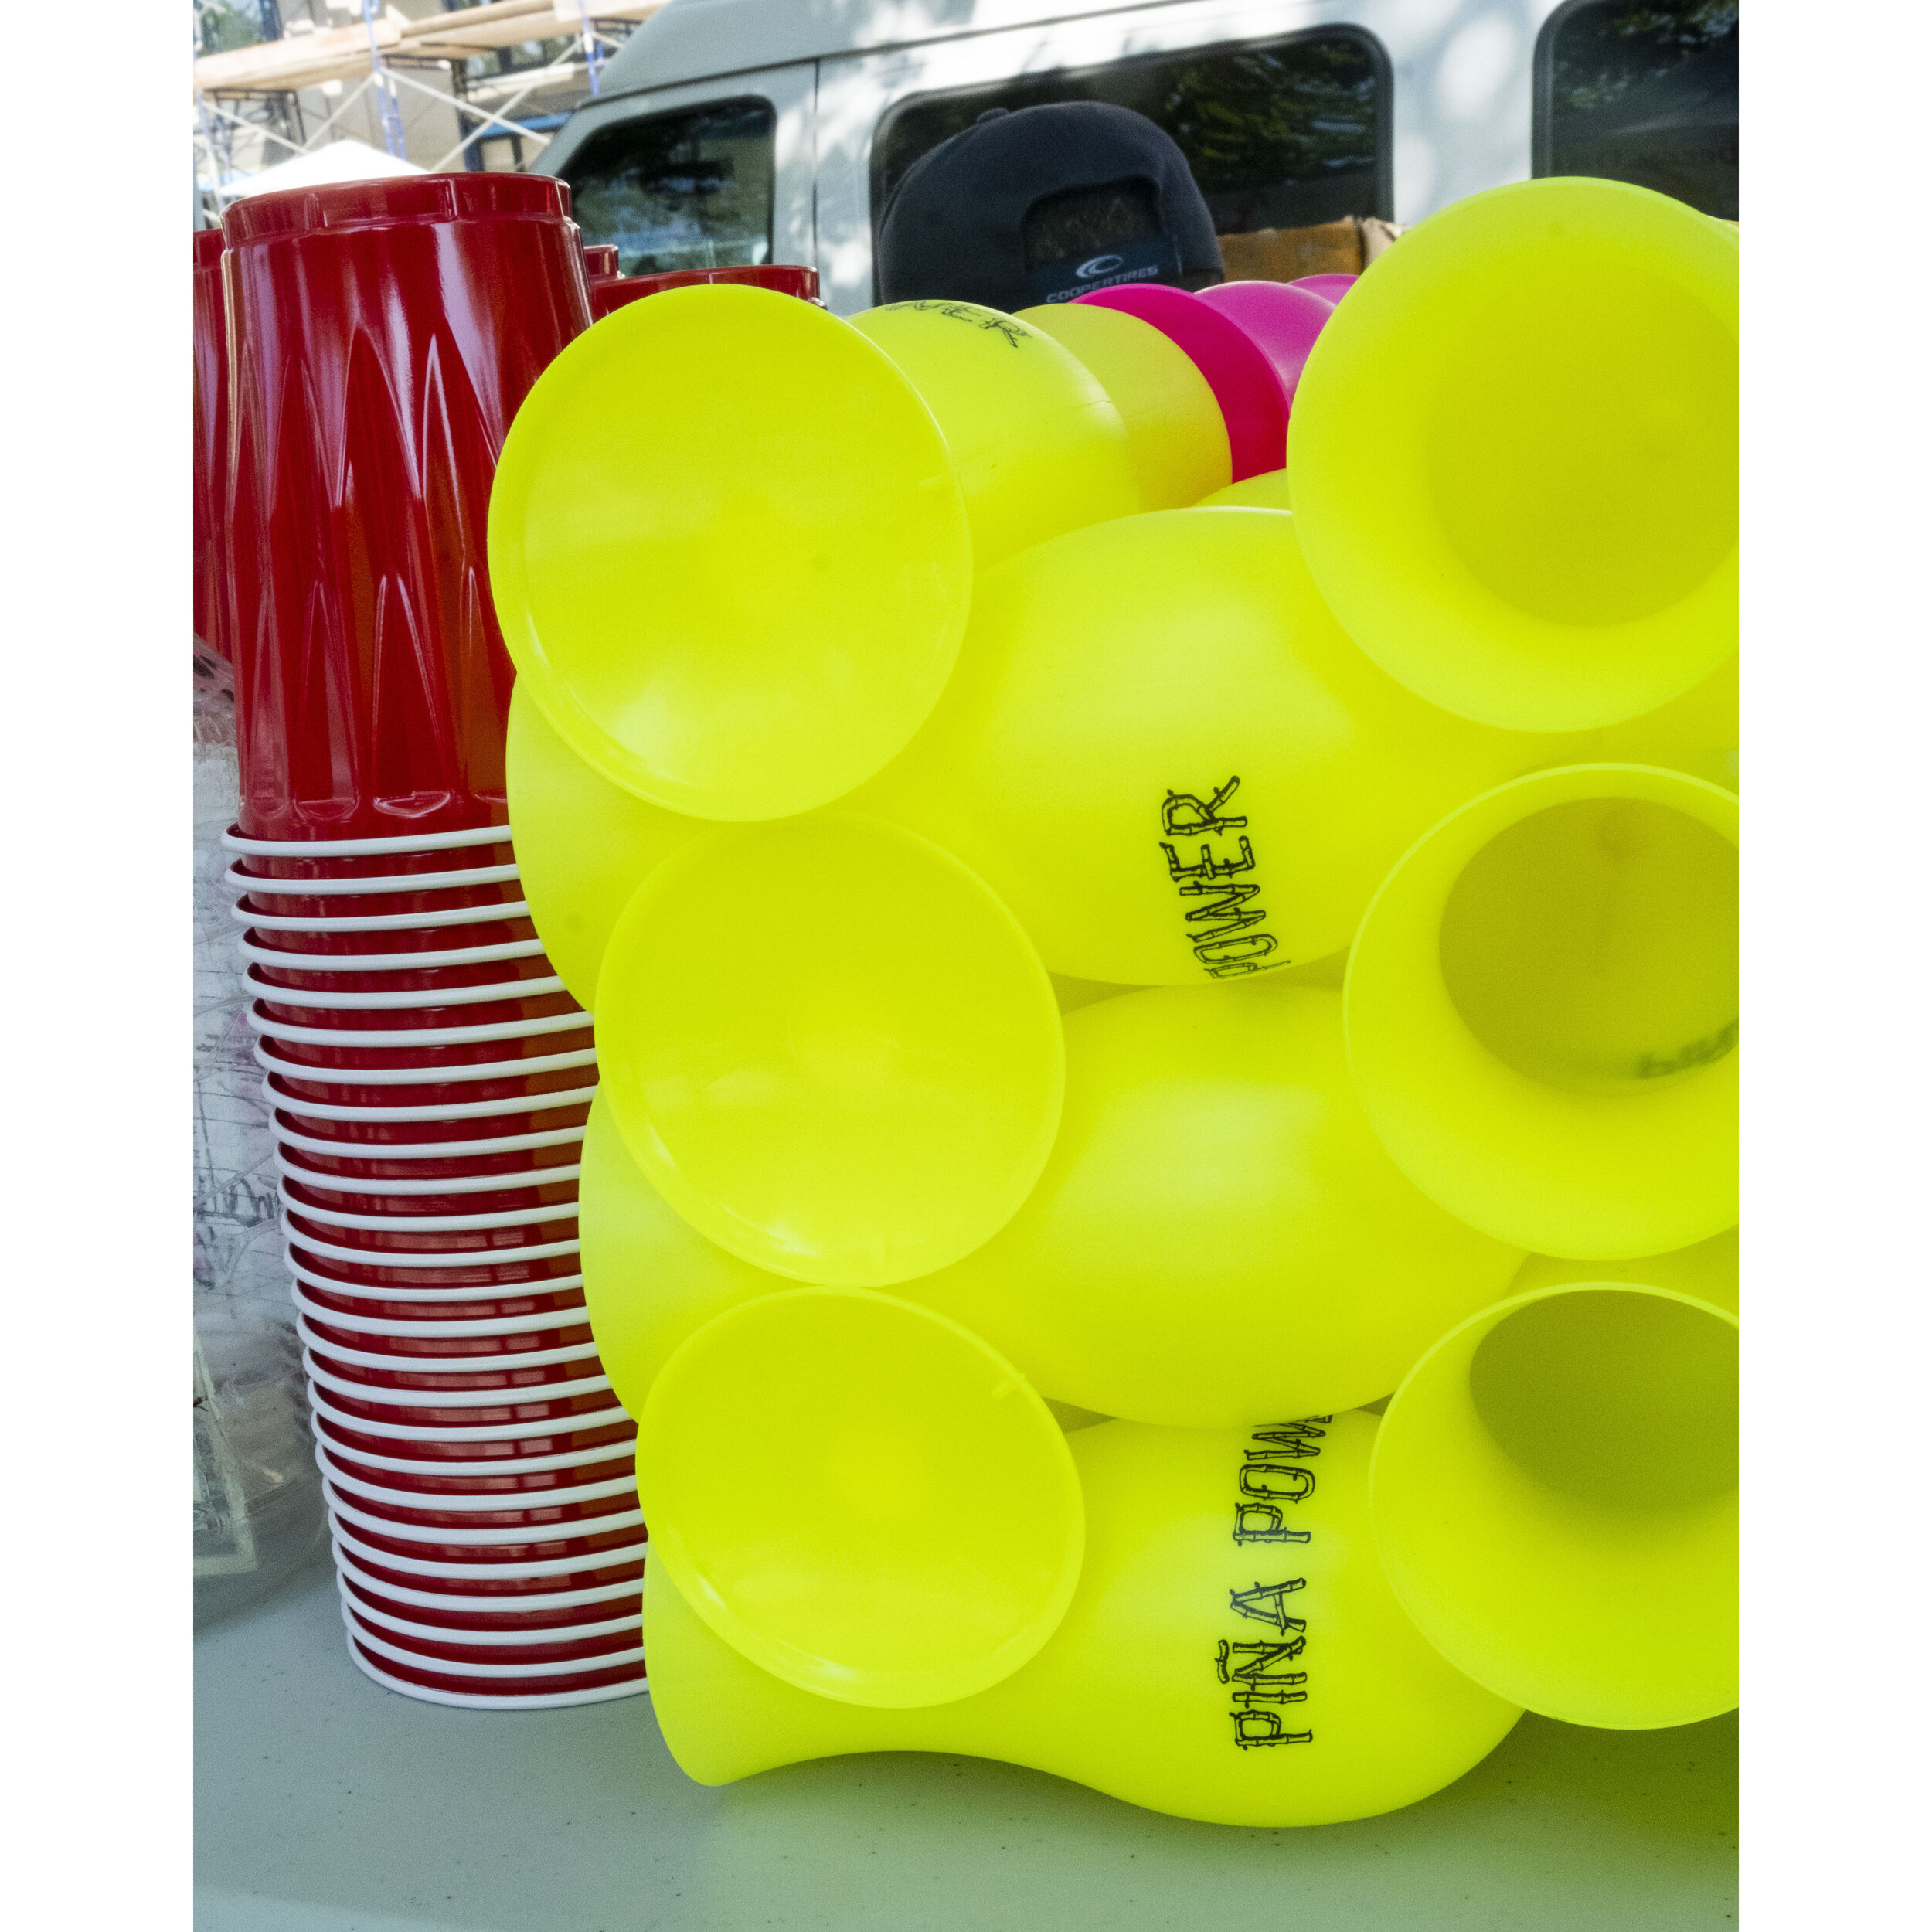 red and yellow cups.jpg